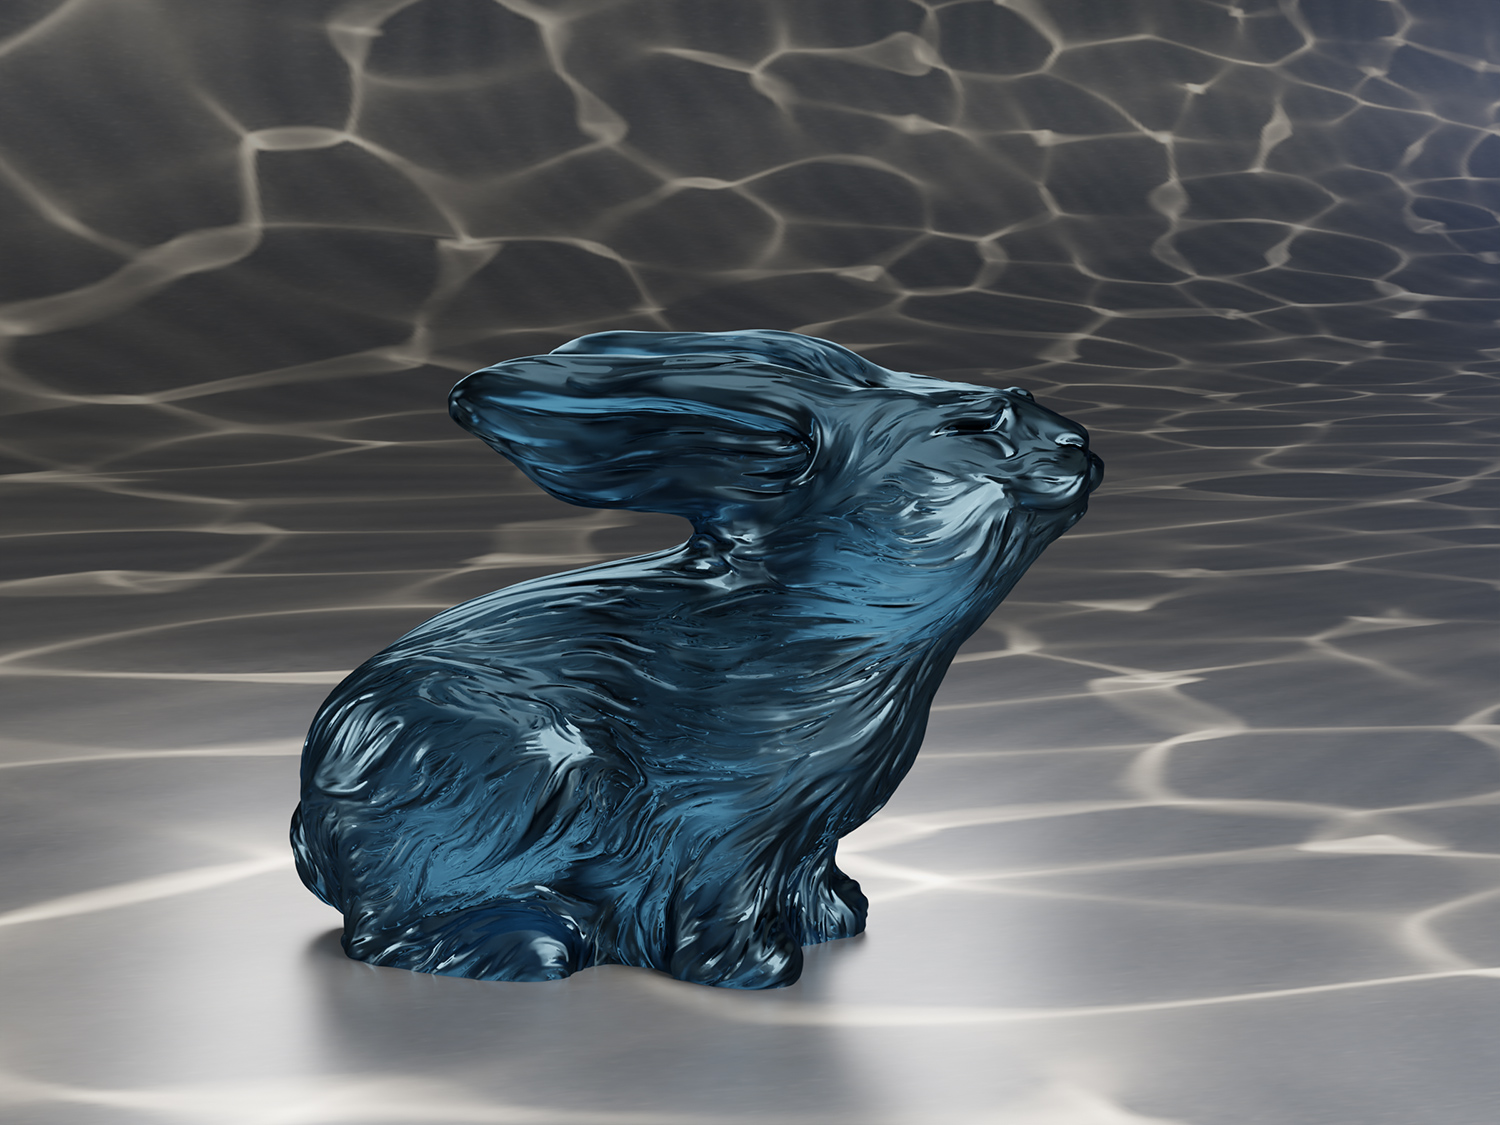 Concept Sculpture of the Water Rabbit, Mystical Character Design. Realistic 3D Rendering.